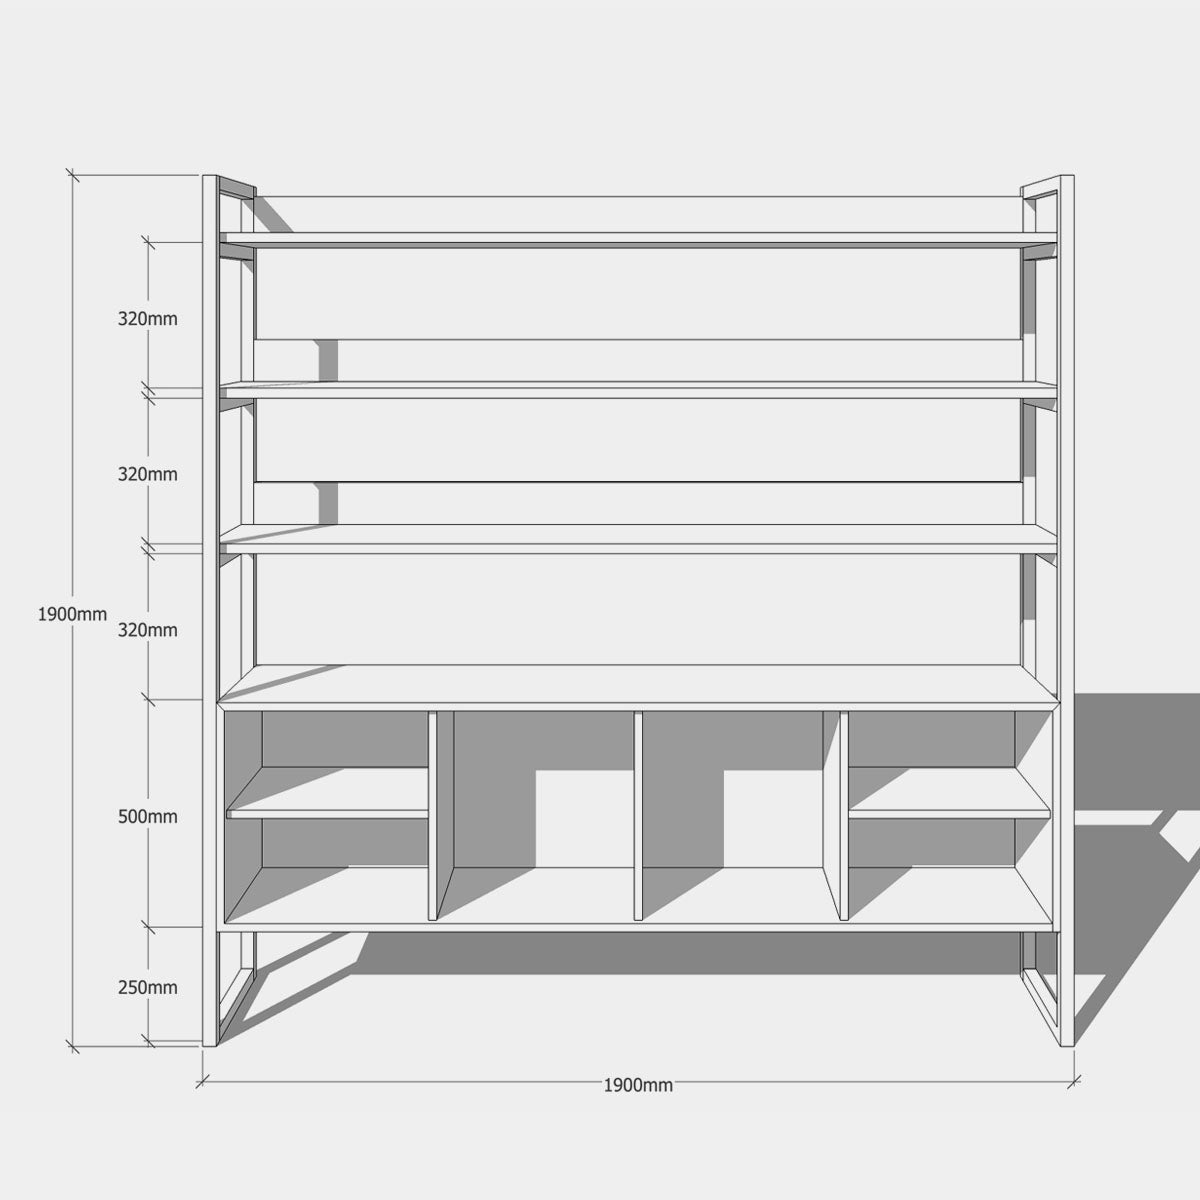 An image of the Walnut Shelving Unit, Ari product available from Koda Studios